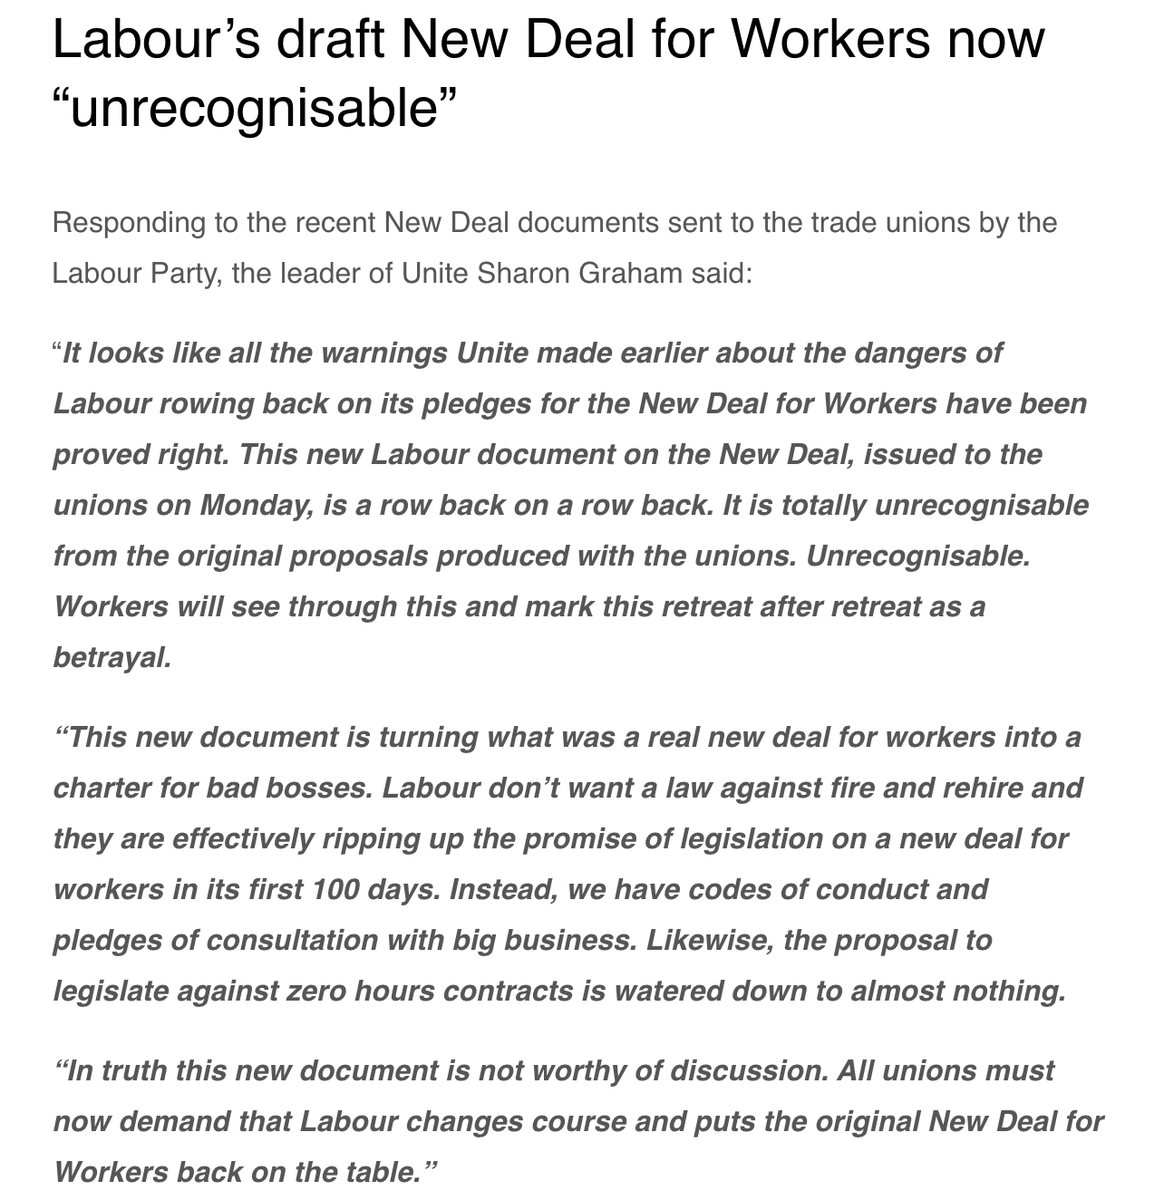 Labour's last distinctive policy package standing was on workers' rights. Well, that's now been trashed. According to Unite general secretary @UniteSharon, it's now 'unrecognisable'. She says: 'In truth this new document is not worthy of discussion.'